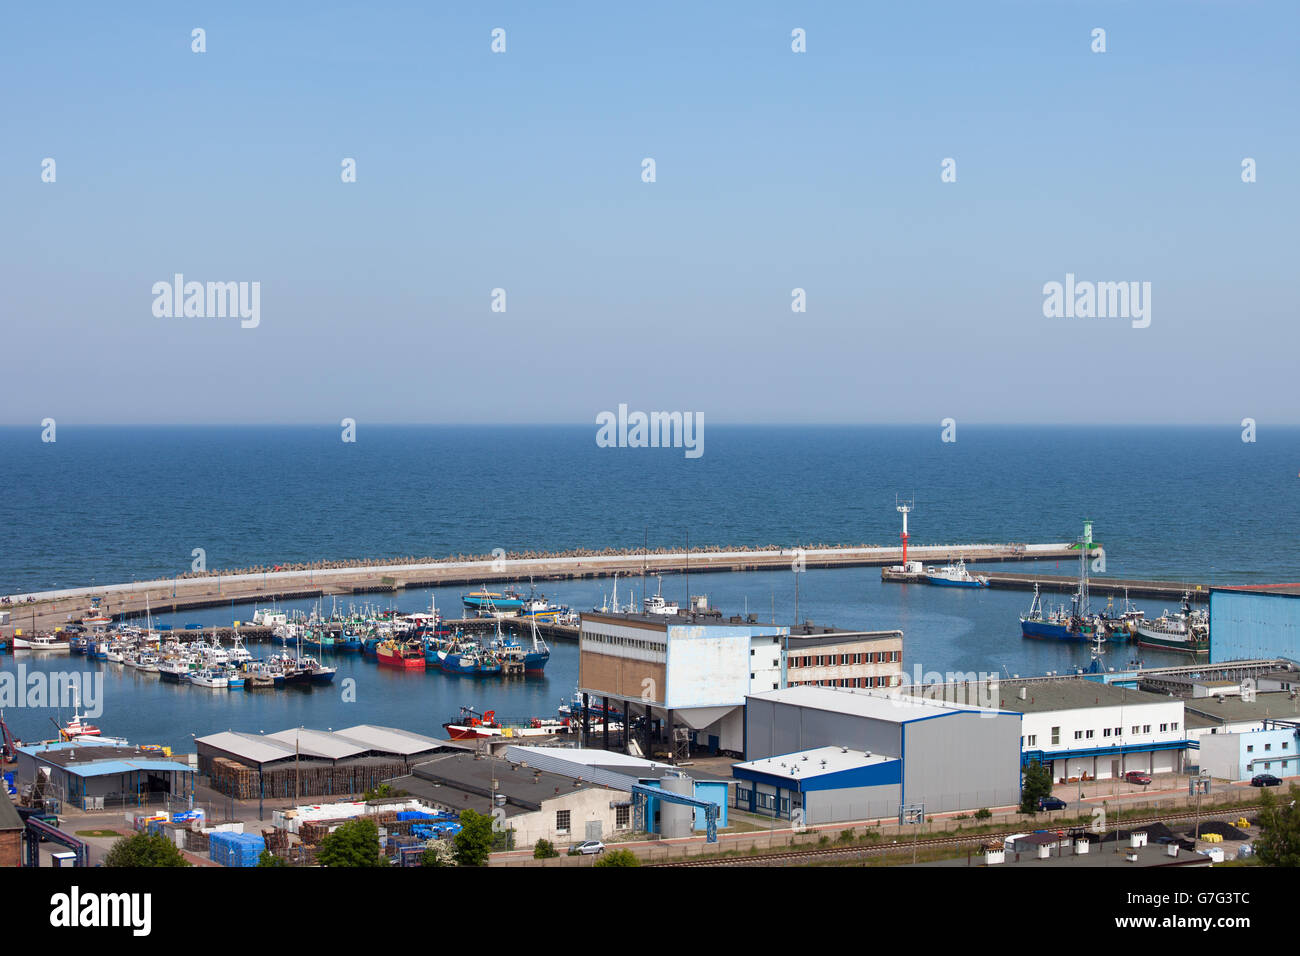 Fishing boats, trawlers in Wladyslawowo Port at Baltic Sea in Poland, view from above Stock Photo